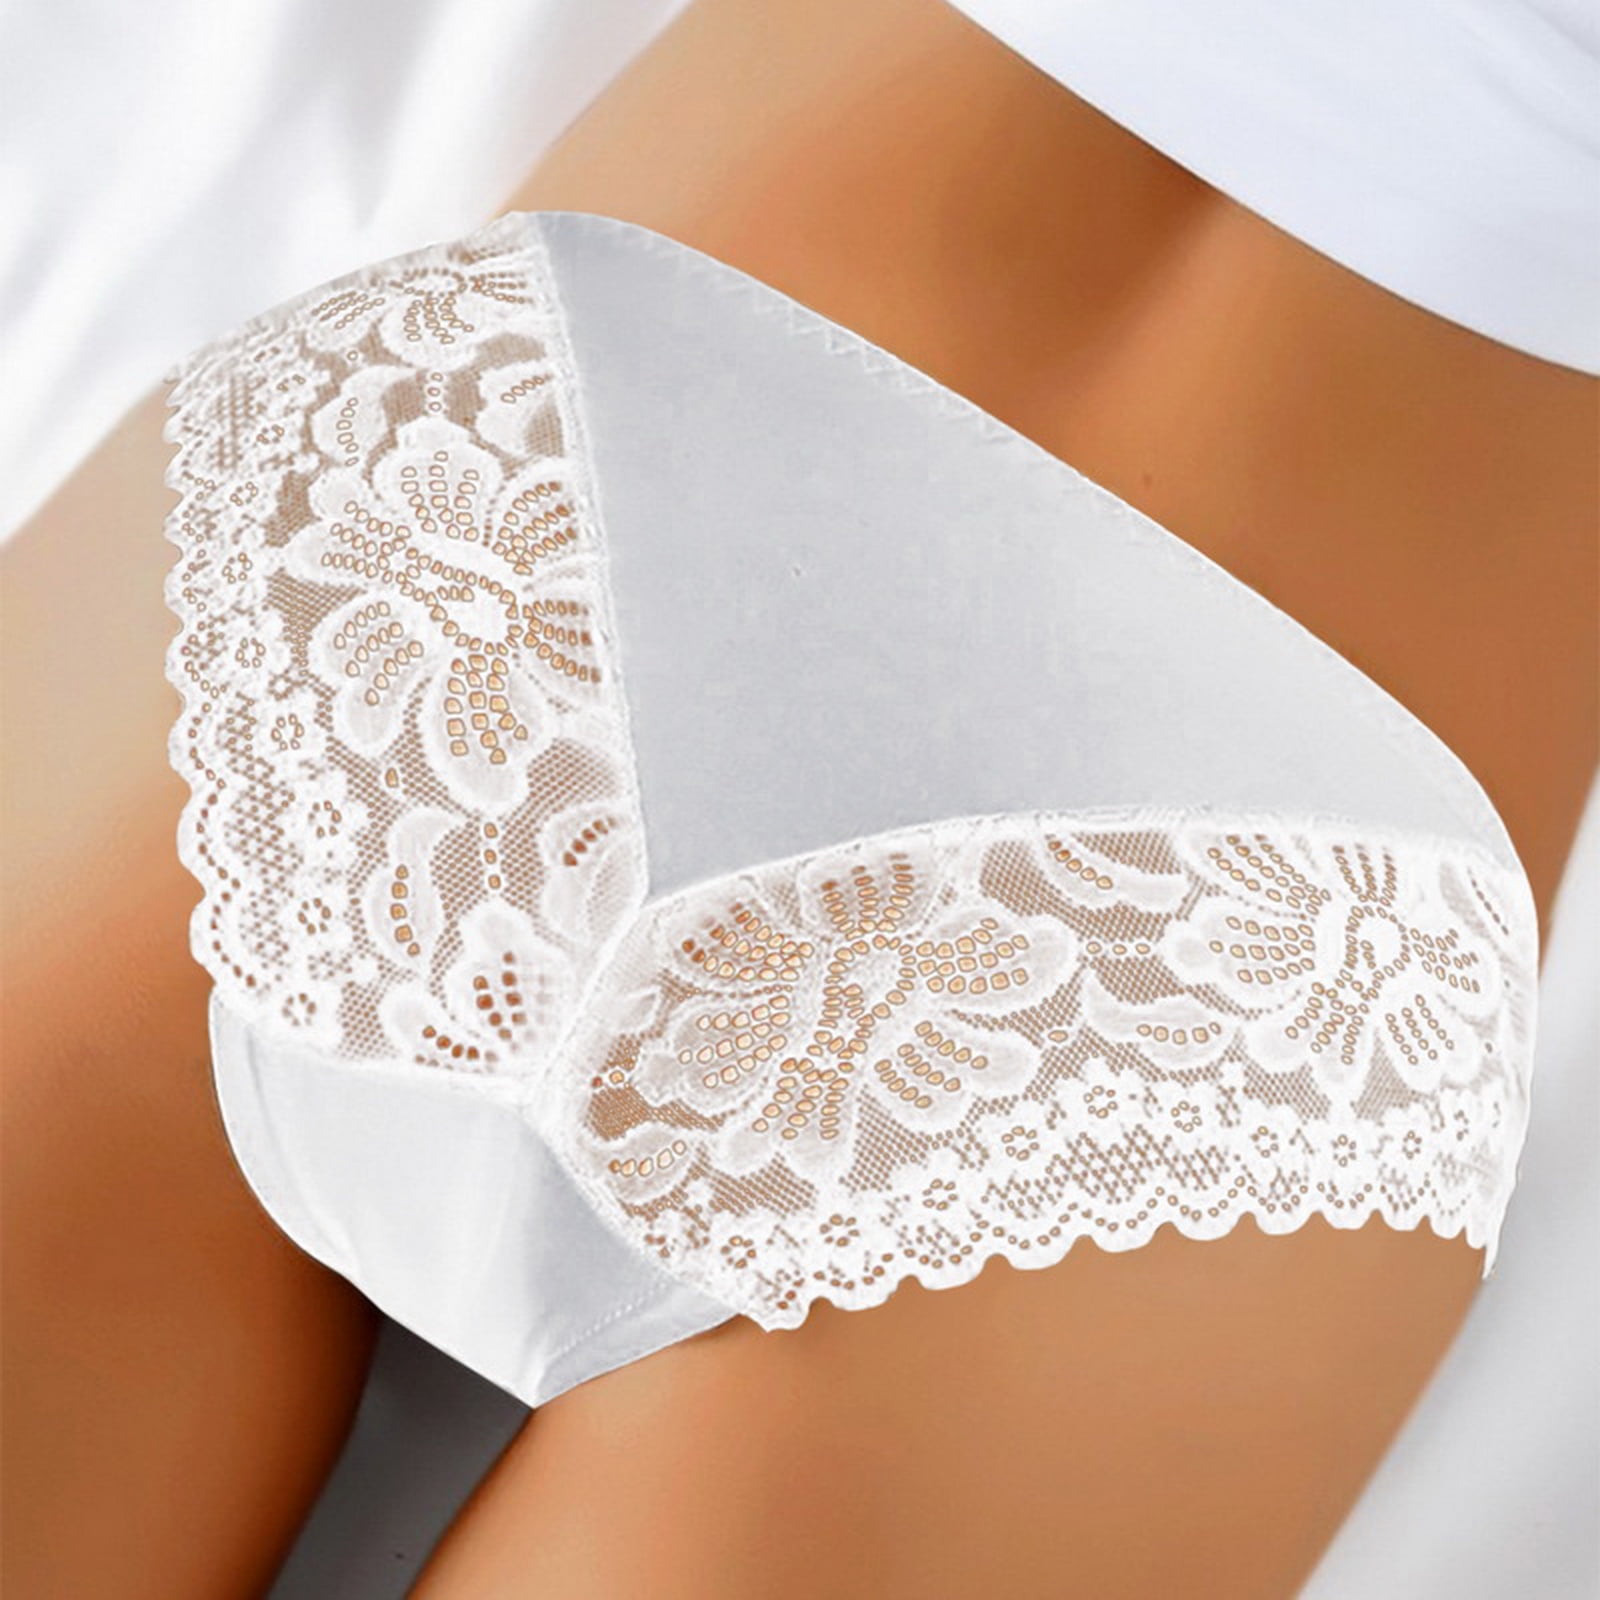 Transparent Lace But Lifts Underwear  Sexy High Waist Underwear For  Womens Lingerie From Cndream, $1.87